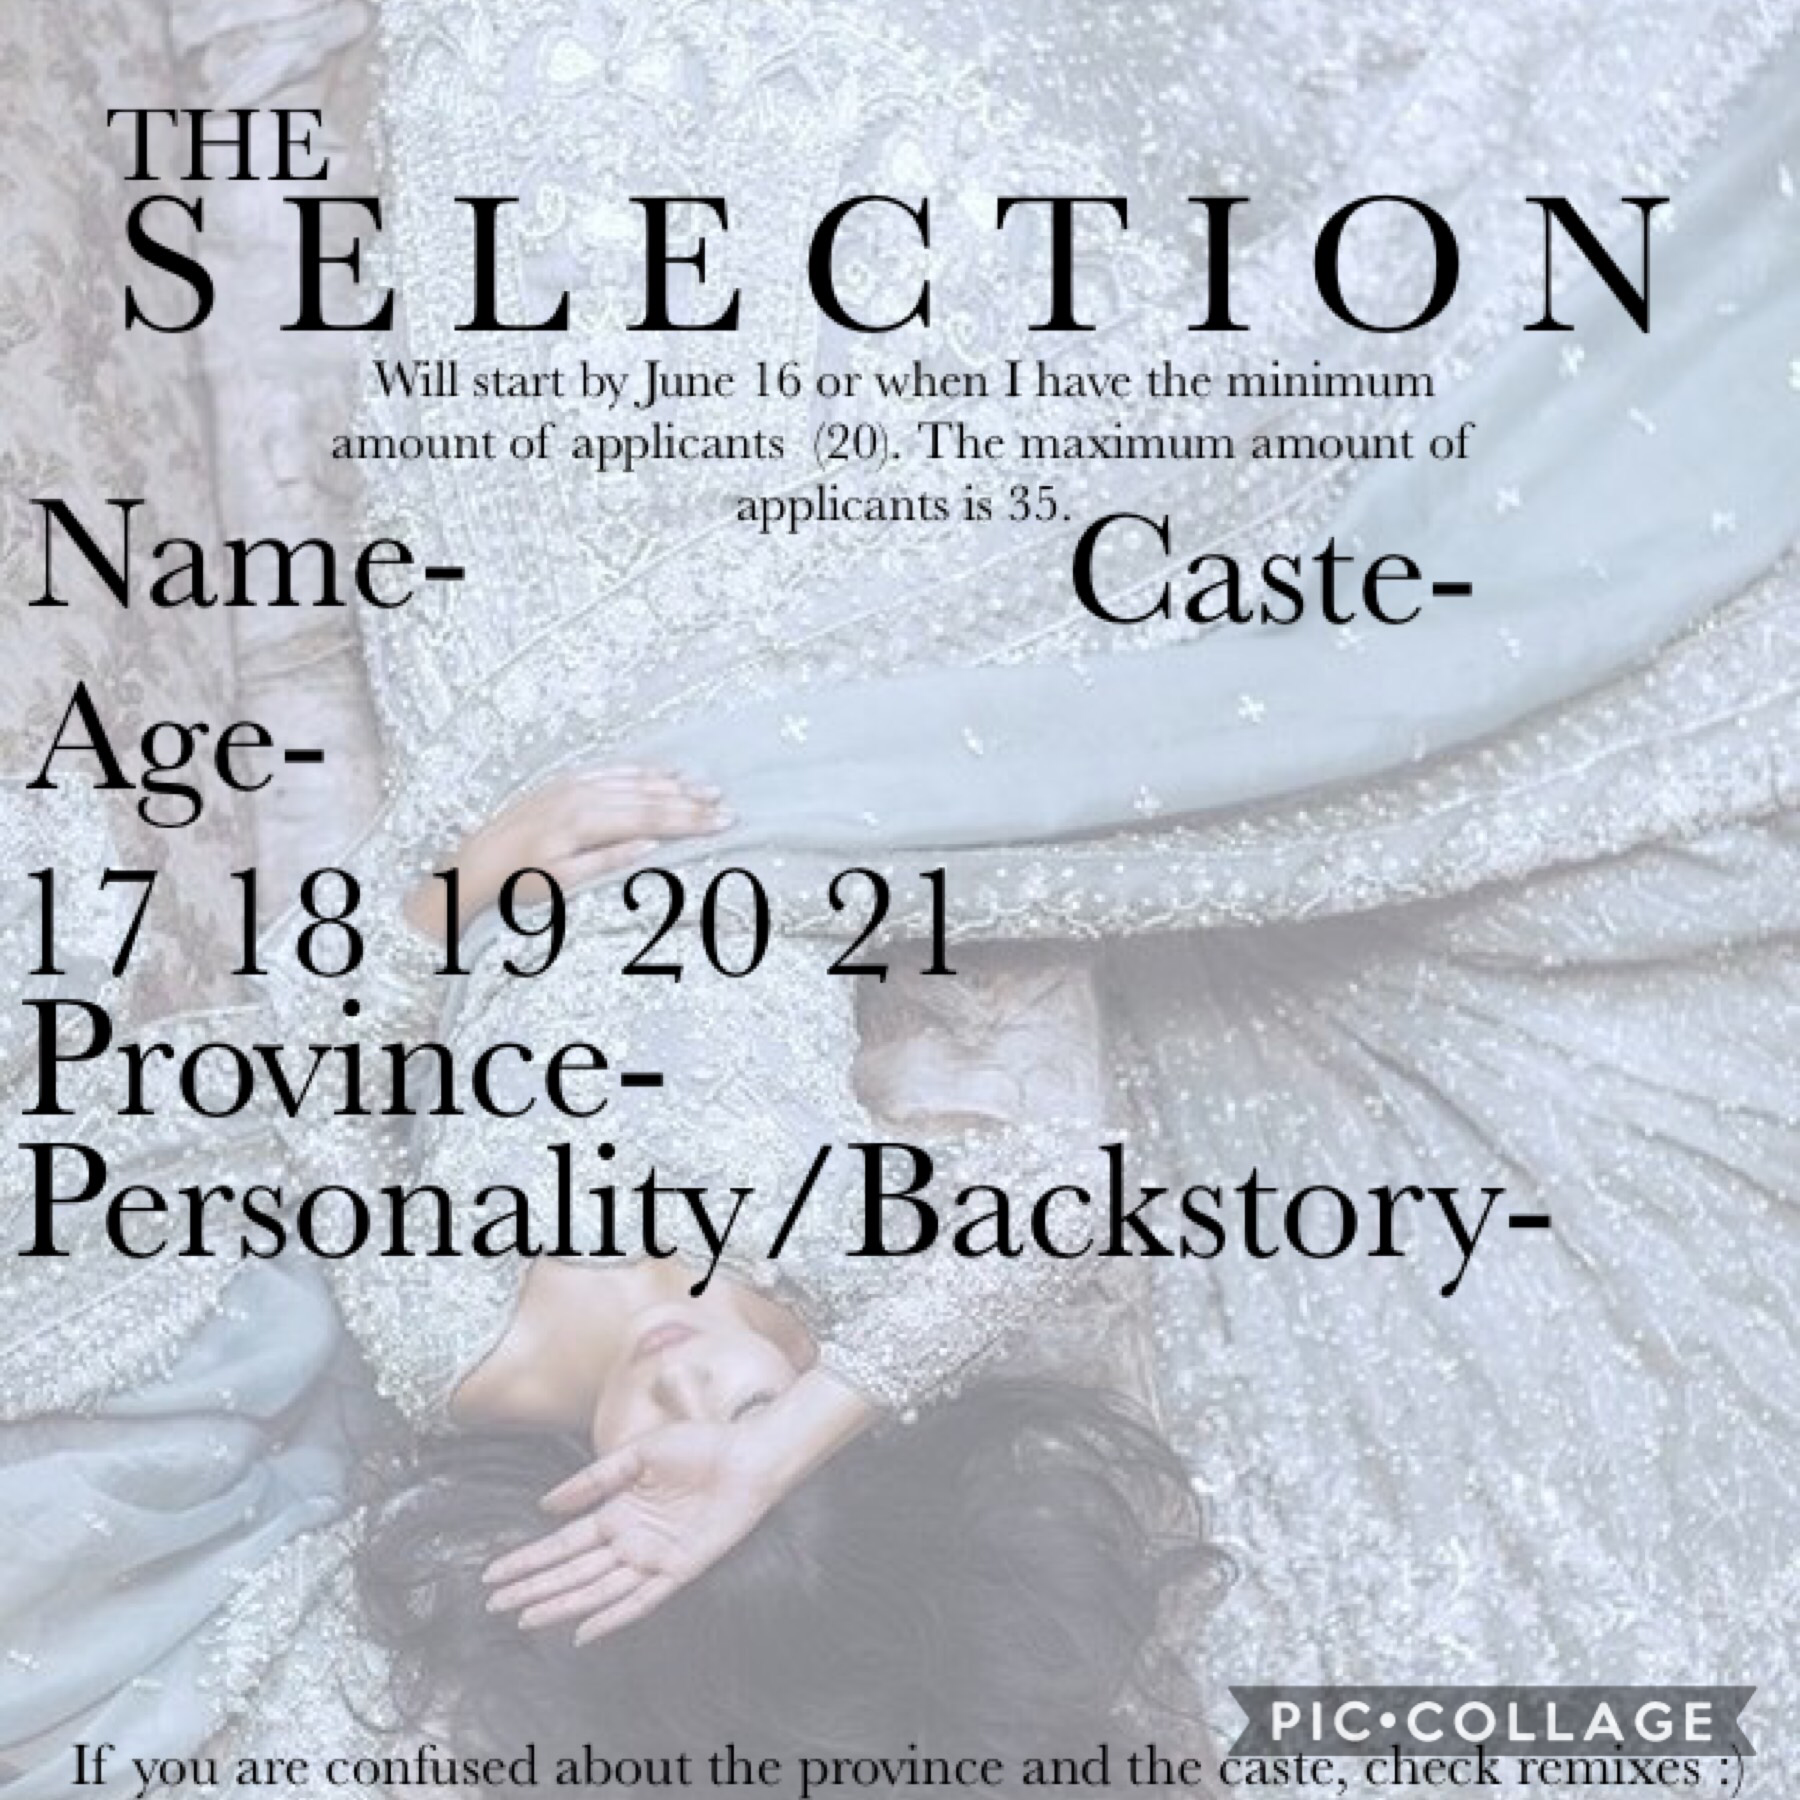 💫•Tap•💫
Welcome to The Selection! Please fill out the form above, and wait patiently till it begins. Lot’s of love, Kat.